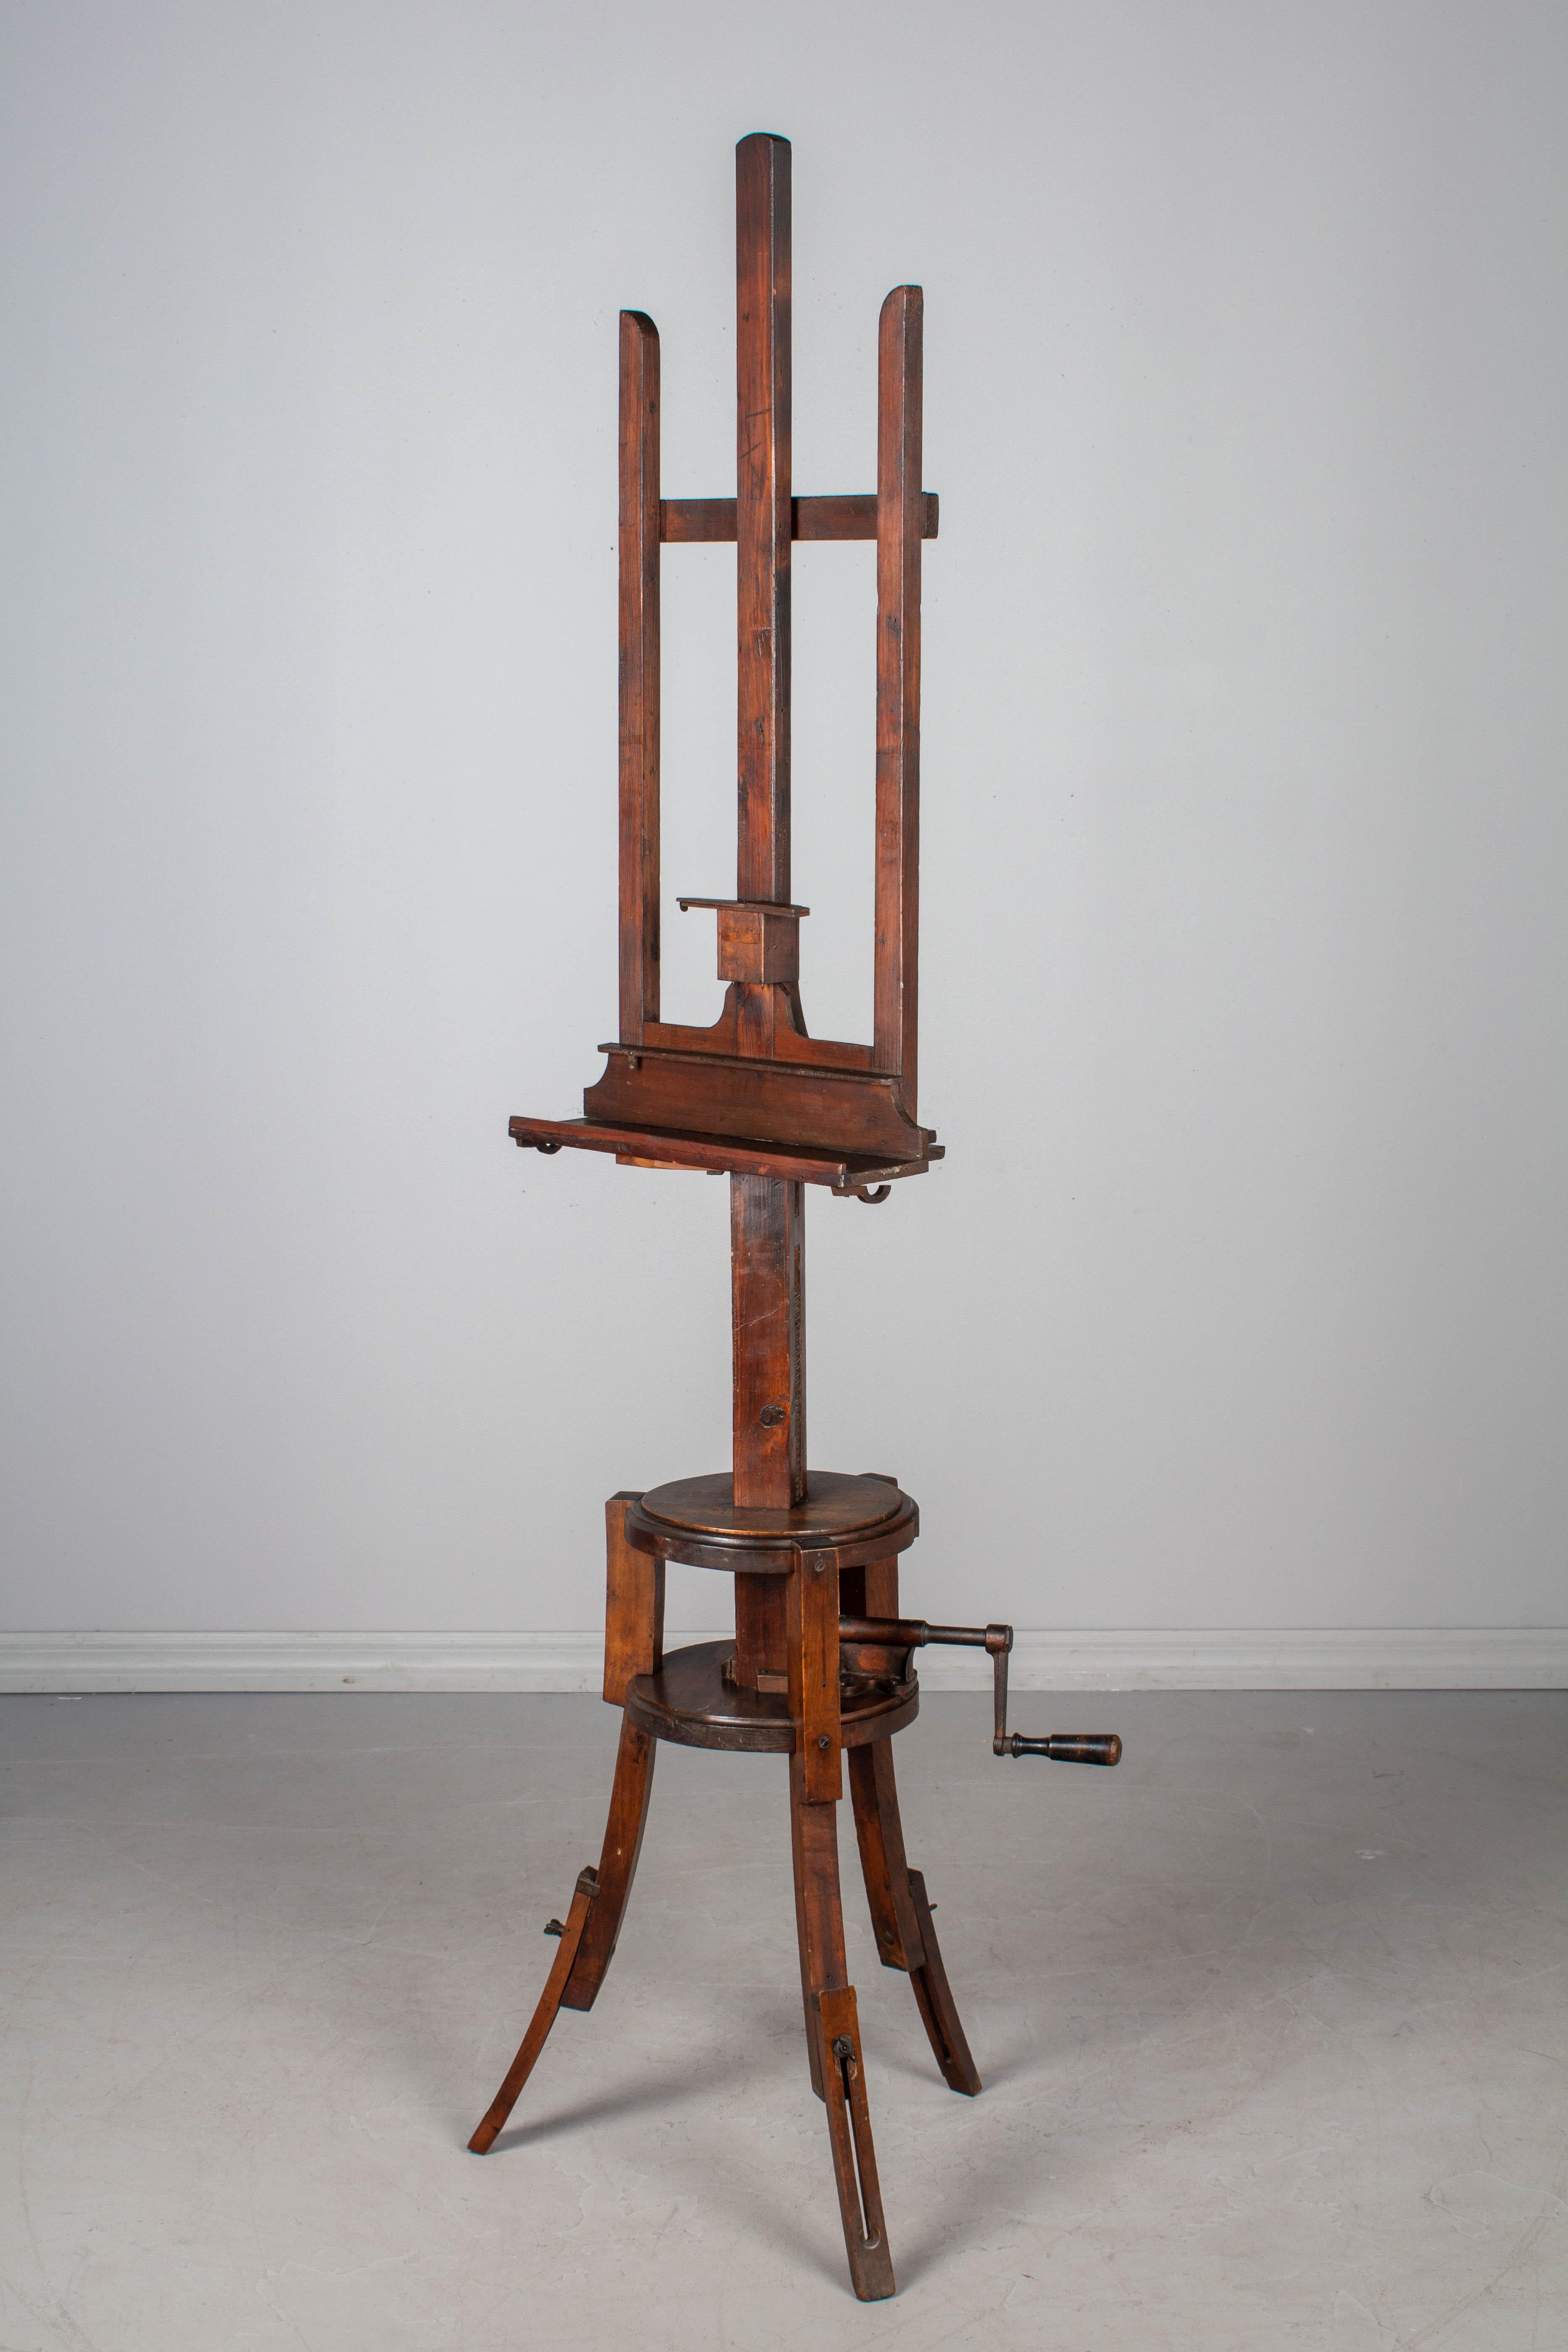 A 19th century French painting display easel with unusual circular base. Made of solid walnut and beechwood with cast iron crank and gear mechanism. Tripod legs with adjustable extensions. Sturdy and well crafted. All original and in working